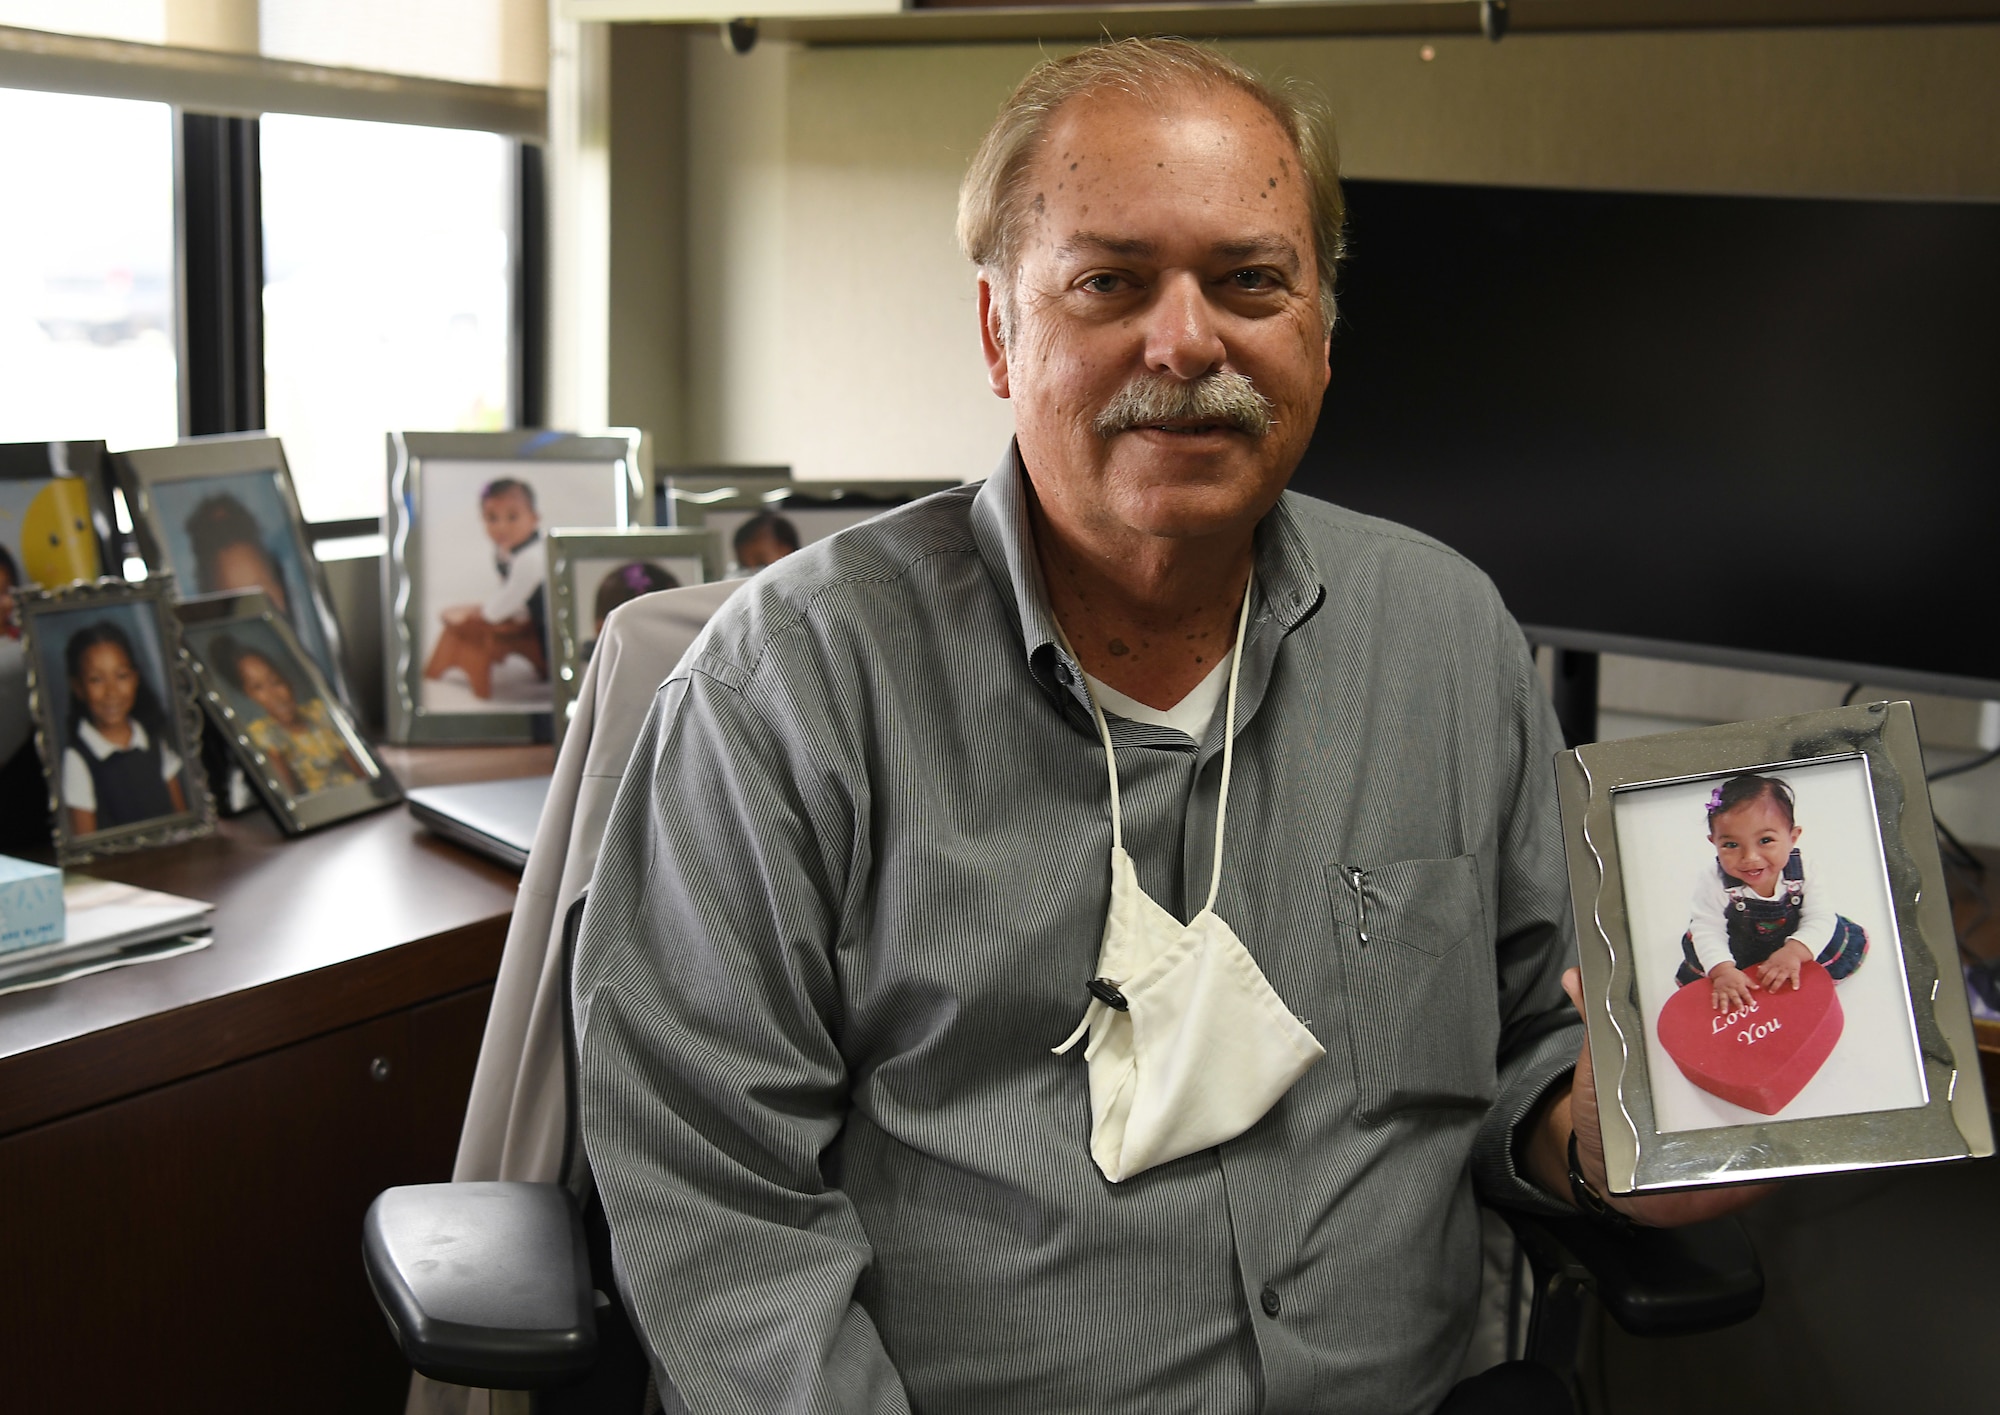 Richard Cote, 30th Civil Engineer Squadron deputy commander, holds a picture of his granddaughter, Jaiden, June 24, 2020, at Vandenberg Air Force Base, Calif.